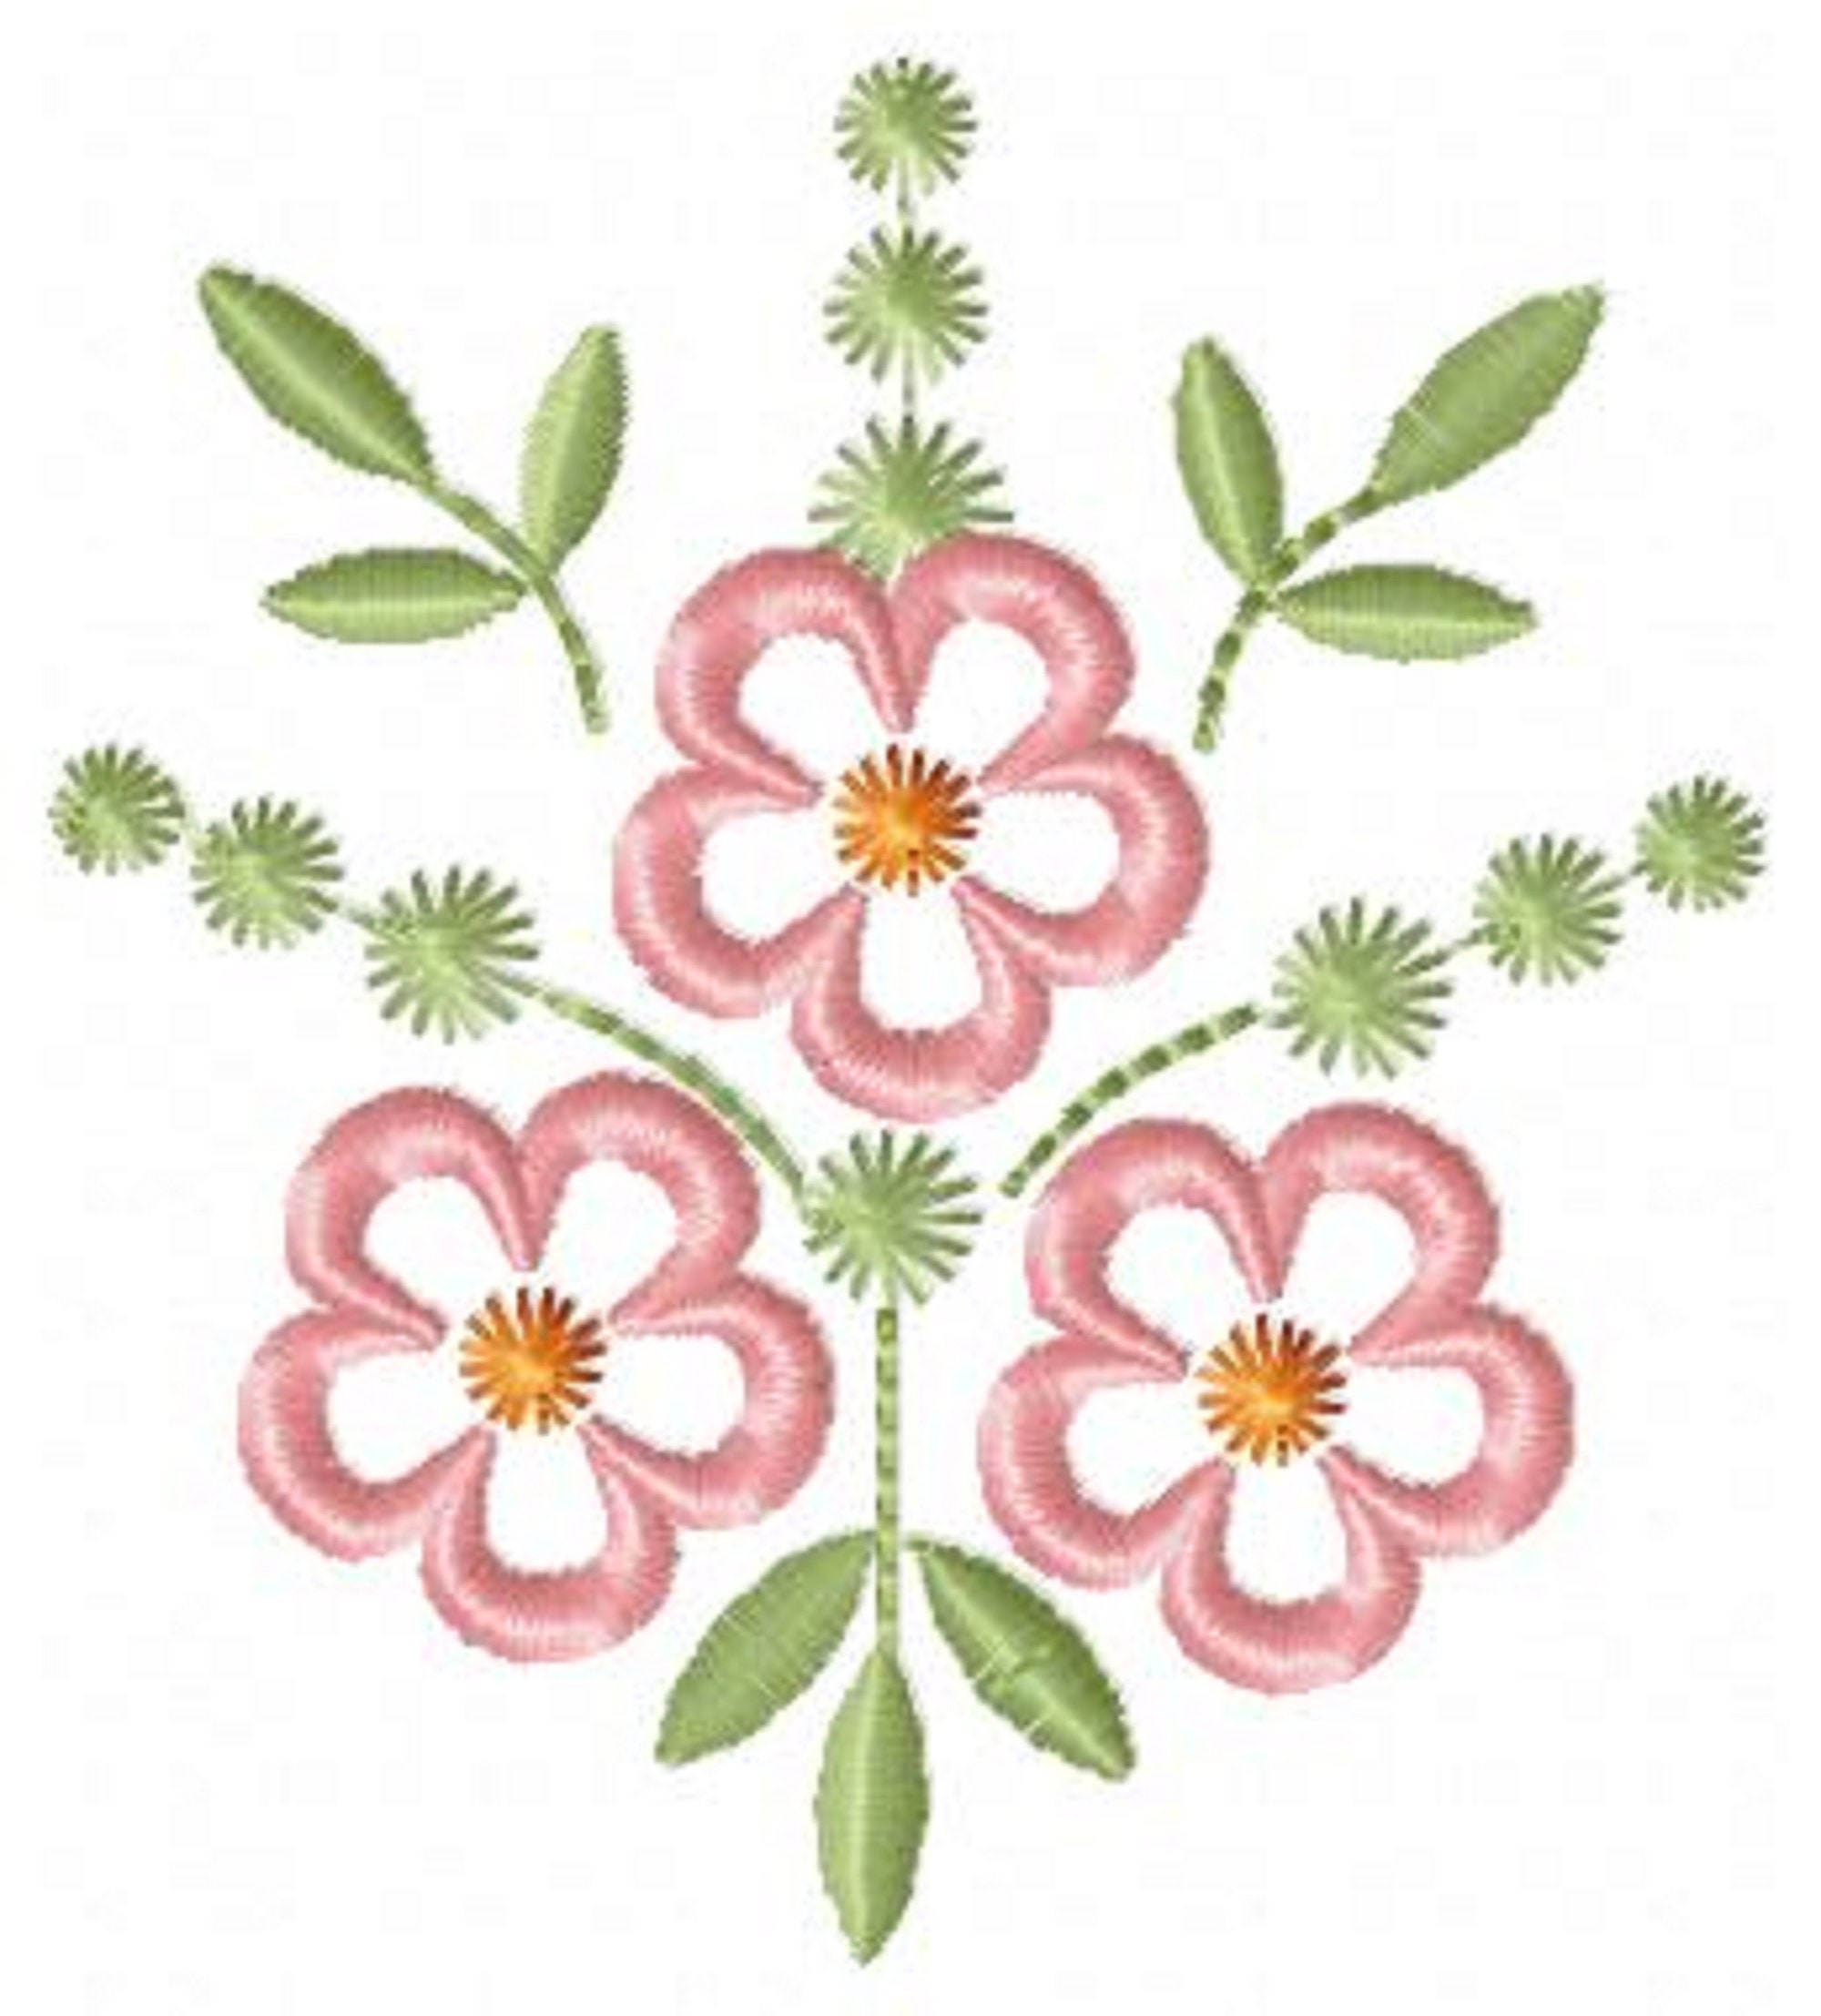 Creative Flower Embroidery Design - Machine Embroidery Pattern- 2 Types –  Instant Download Machine Embroidery Designs